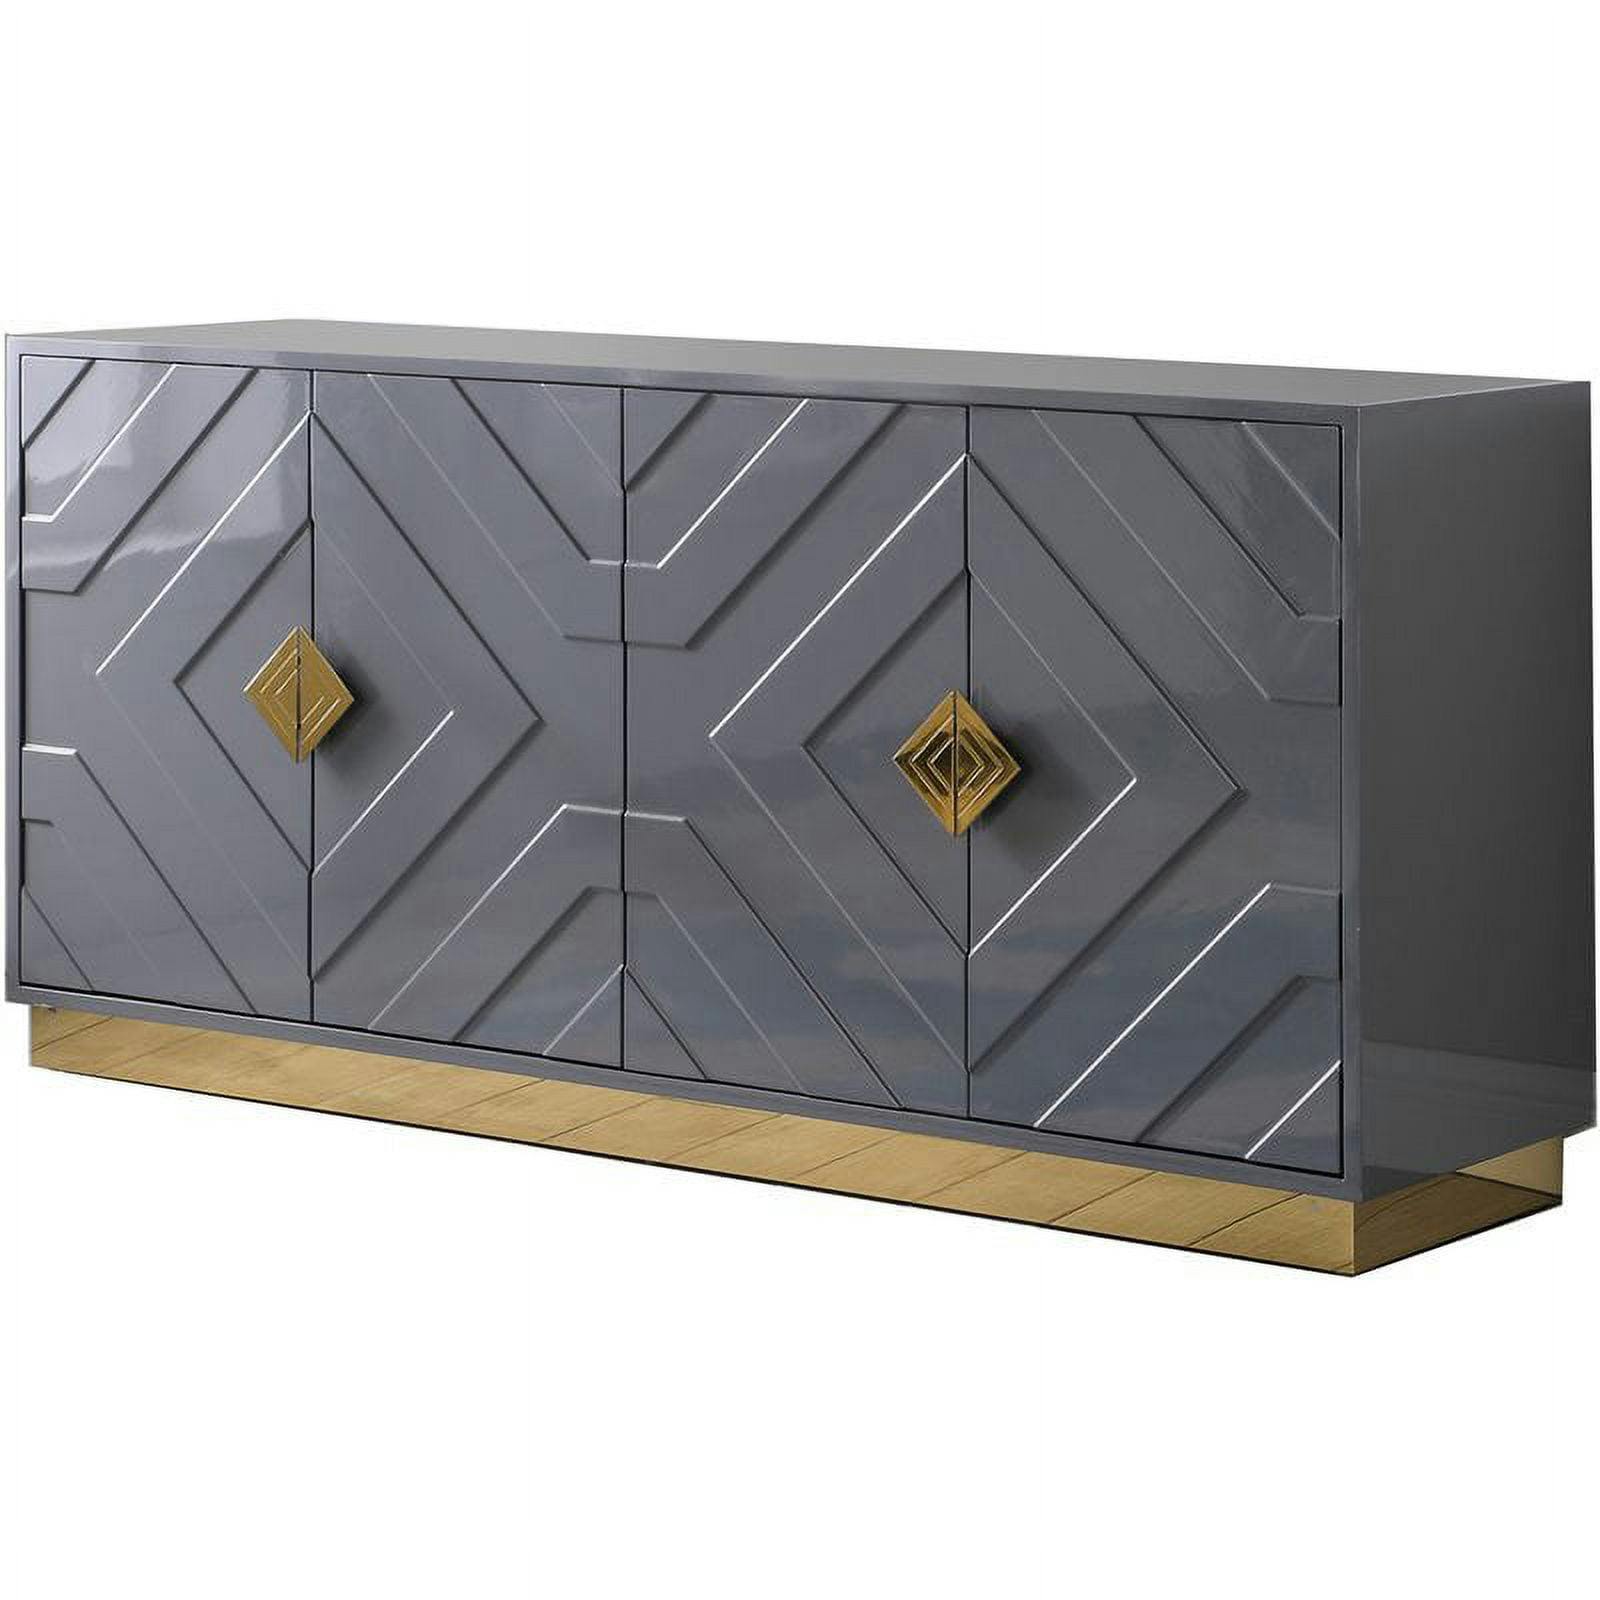 Babatunde 65" Gray Wood Sideboard with Gold Accents